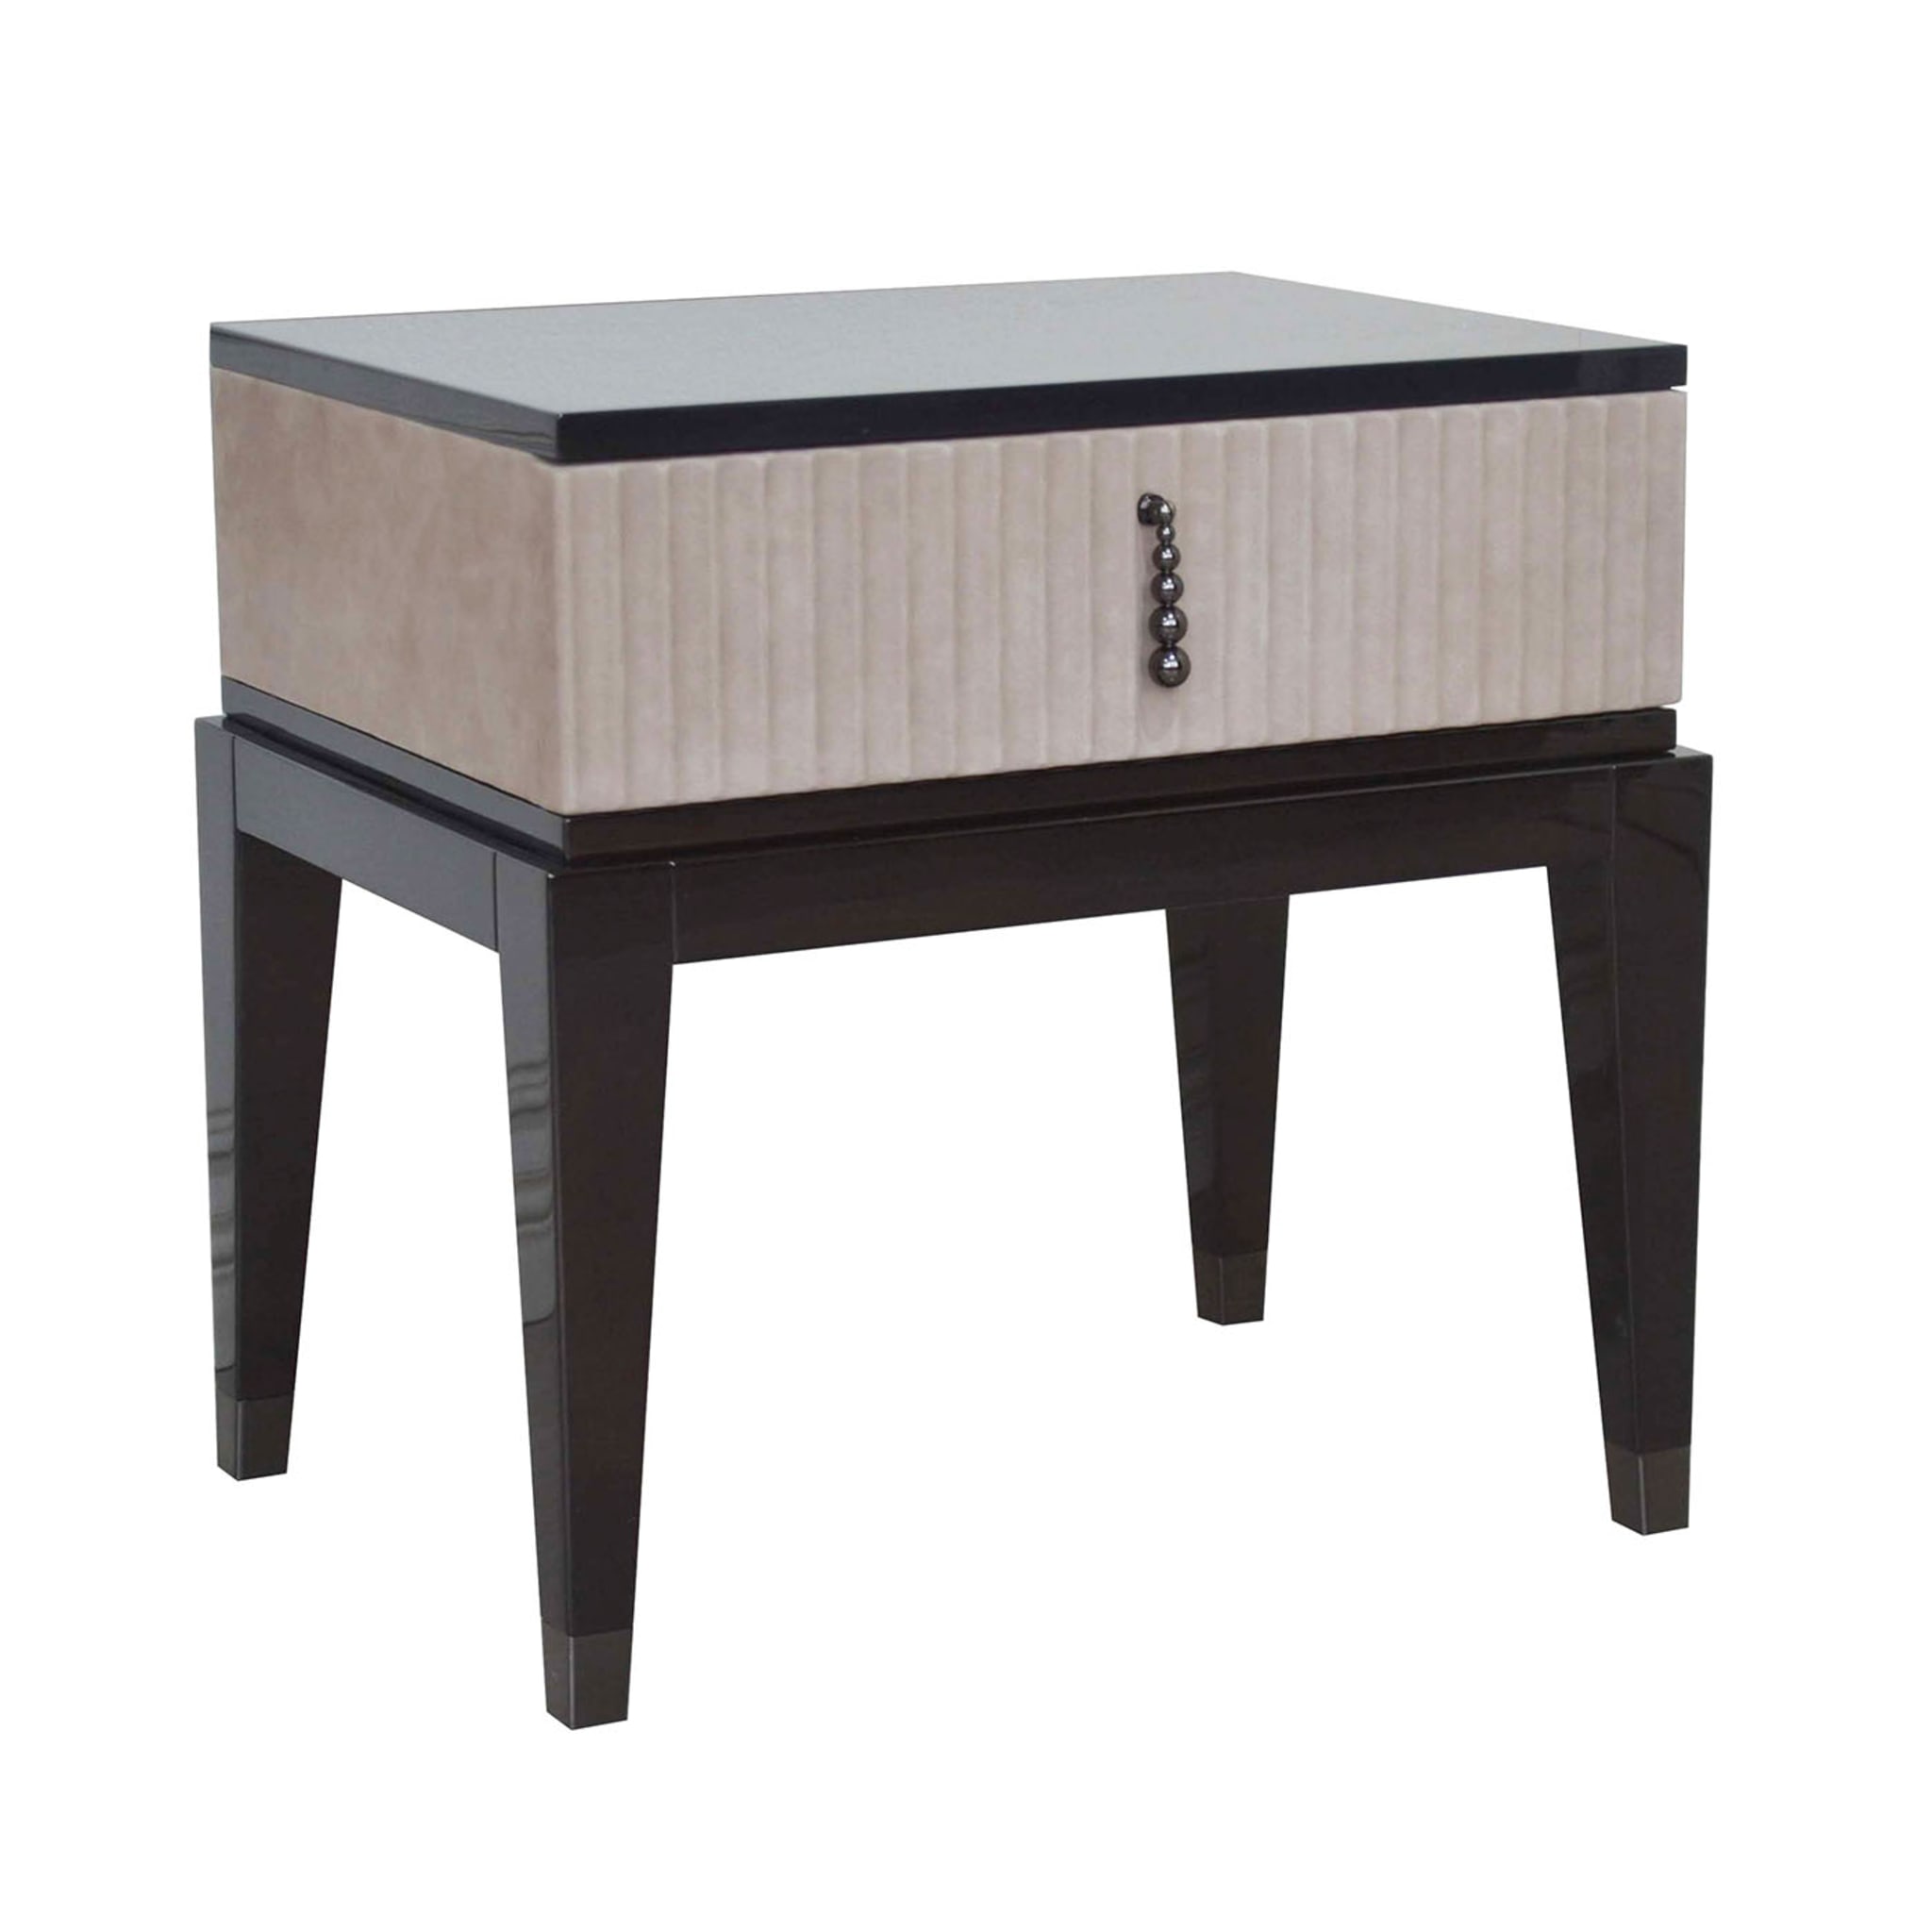 Italian Night Table In Nubuck Upholstered With One Drawer - Alternative view 1